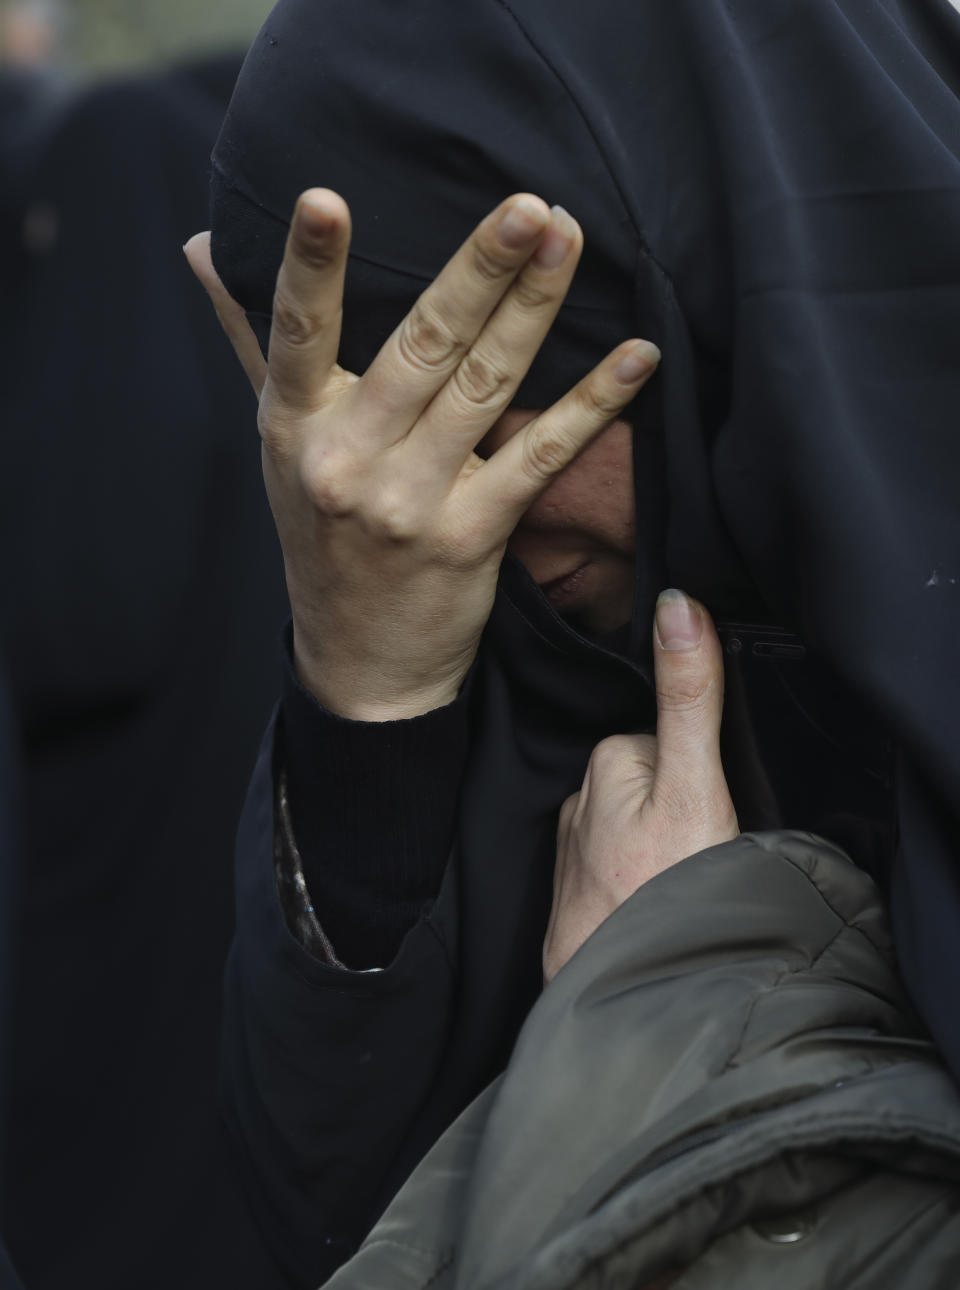 A woman mourns in a demonstration over the U.S. airstrike in Iraq that killed Iranian Revolutionary Guard Gen. Qassem Soleimani in Tehran, Iran, Jan. 3, 2020. Iran has vowed "harsh retaliation" for the U.S. airstrike near Baghdad's airport that killed Tehran's top general and the architect of its interventions across the Middle East, as tensions soared in the wake of the targeted killing. (AP Photo/Vahid Salemi)